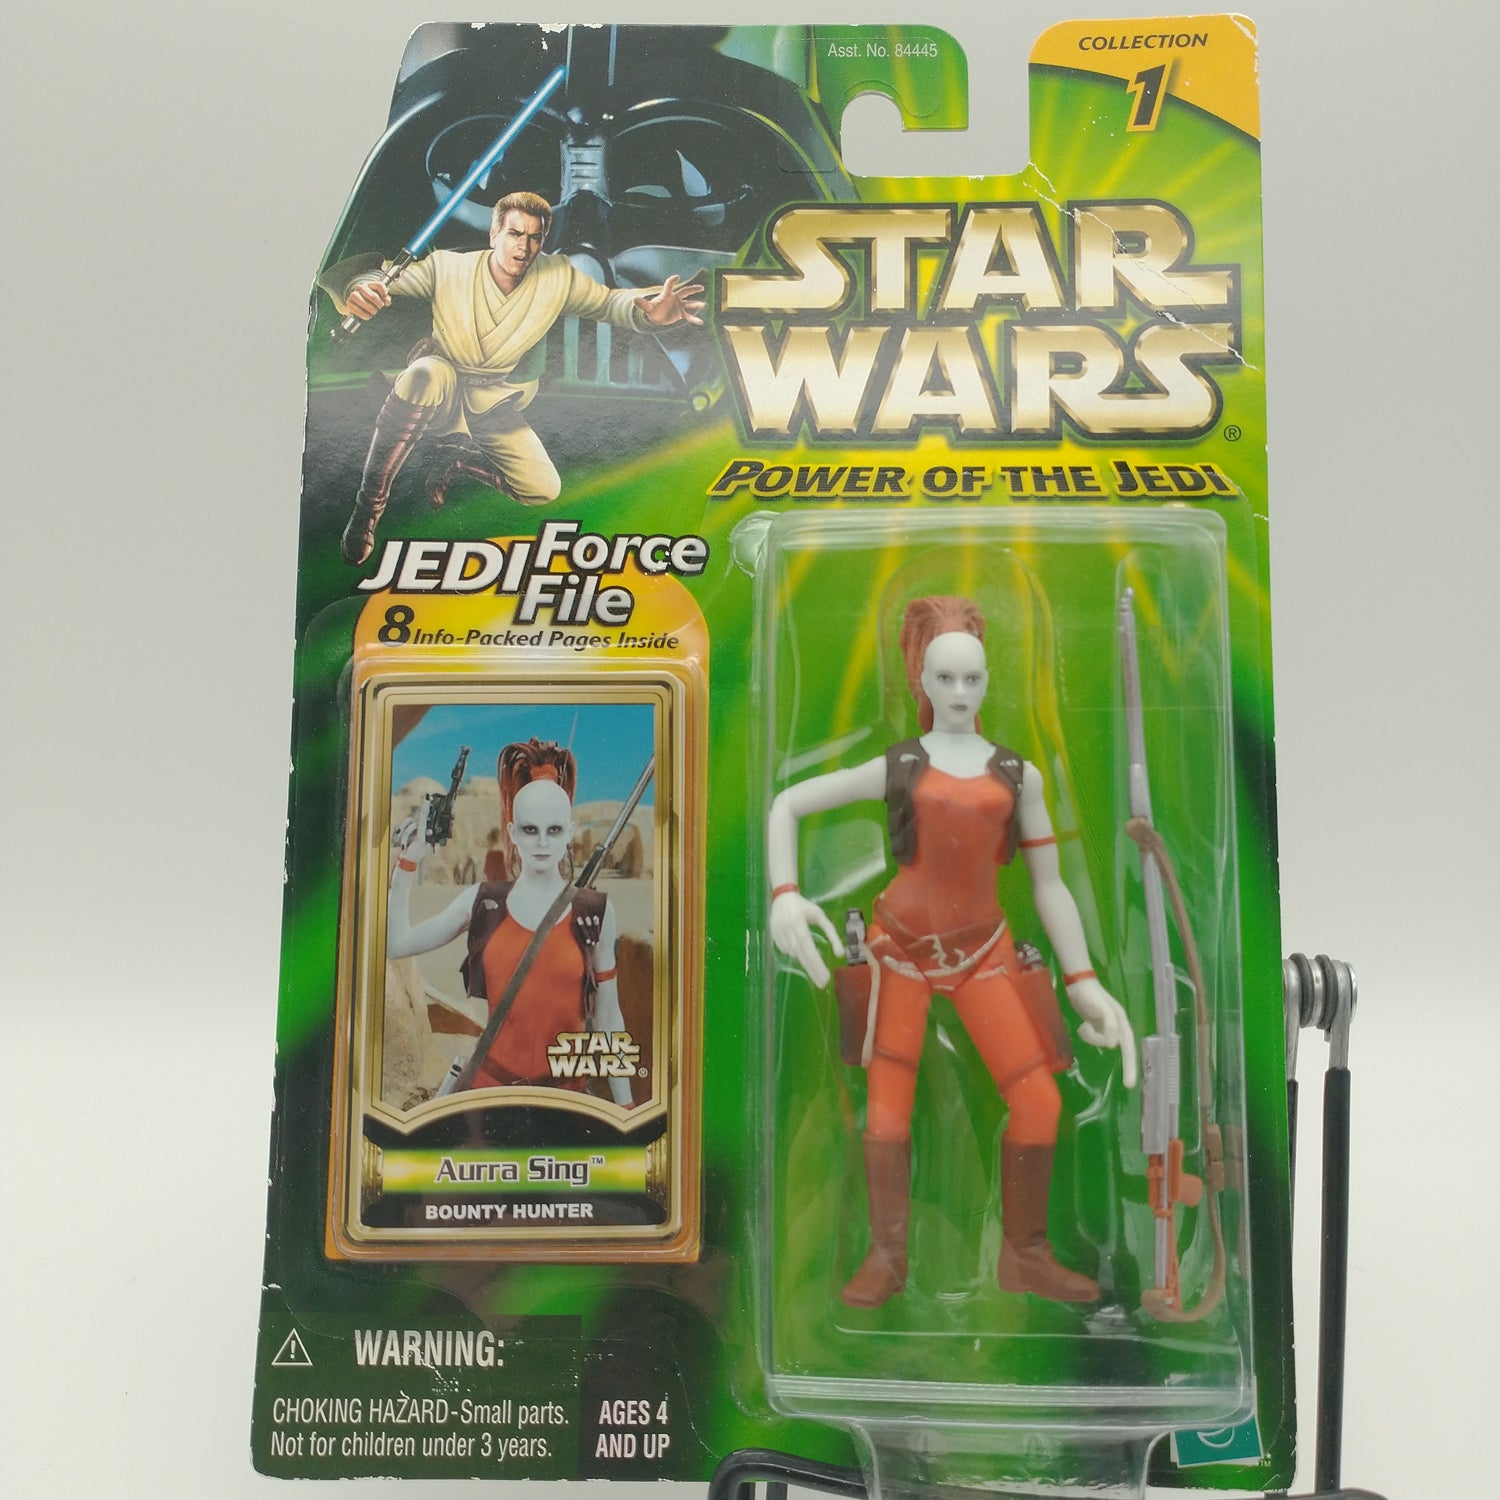 The front of the bubble and card. The action figure is a completely white figure wearing an orange jumpsuit and orange leggings. 